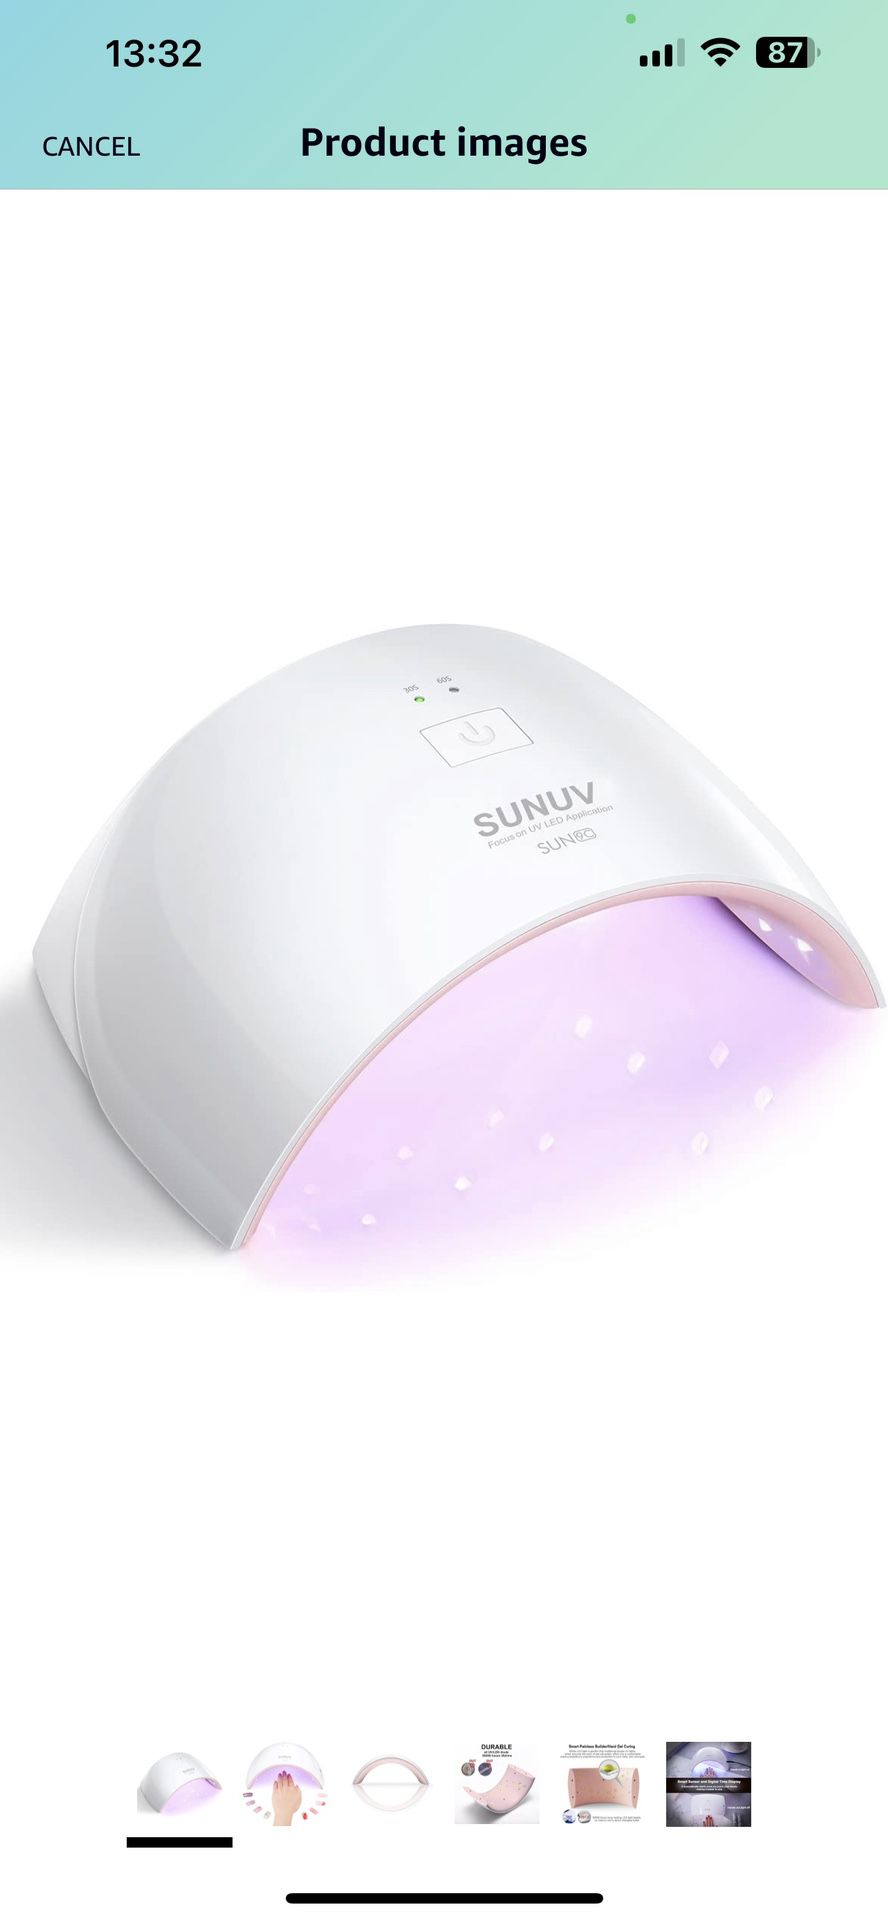 28W UV LED Nail Lamp– UV Light Nails Gel Nail Dryer With Autor Sensor and 2 Timers Professional UV Lamp Gel Nails for Salon and Home Sessions LED Nail